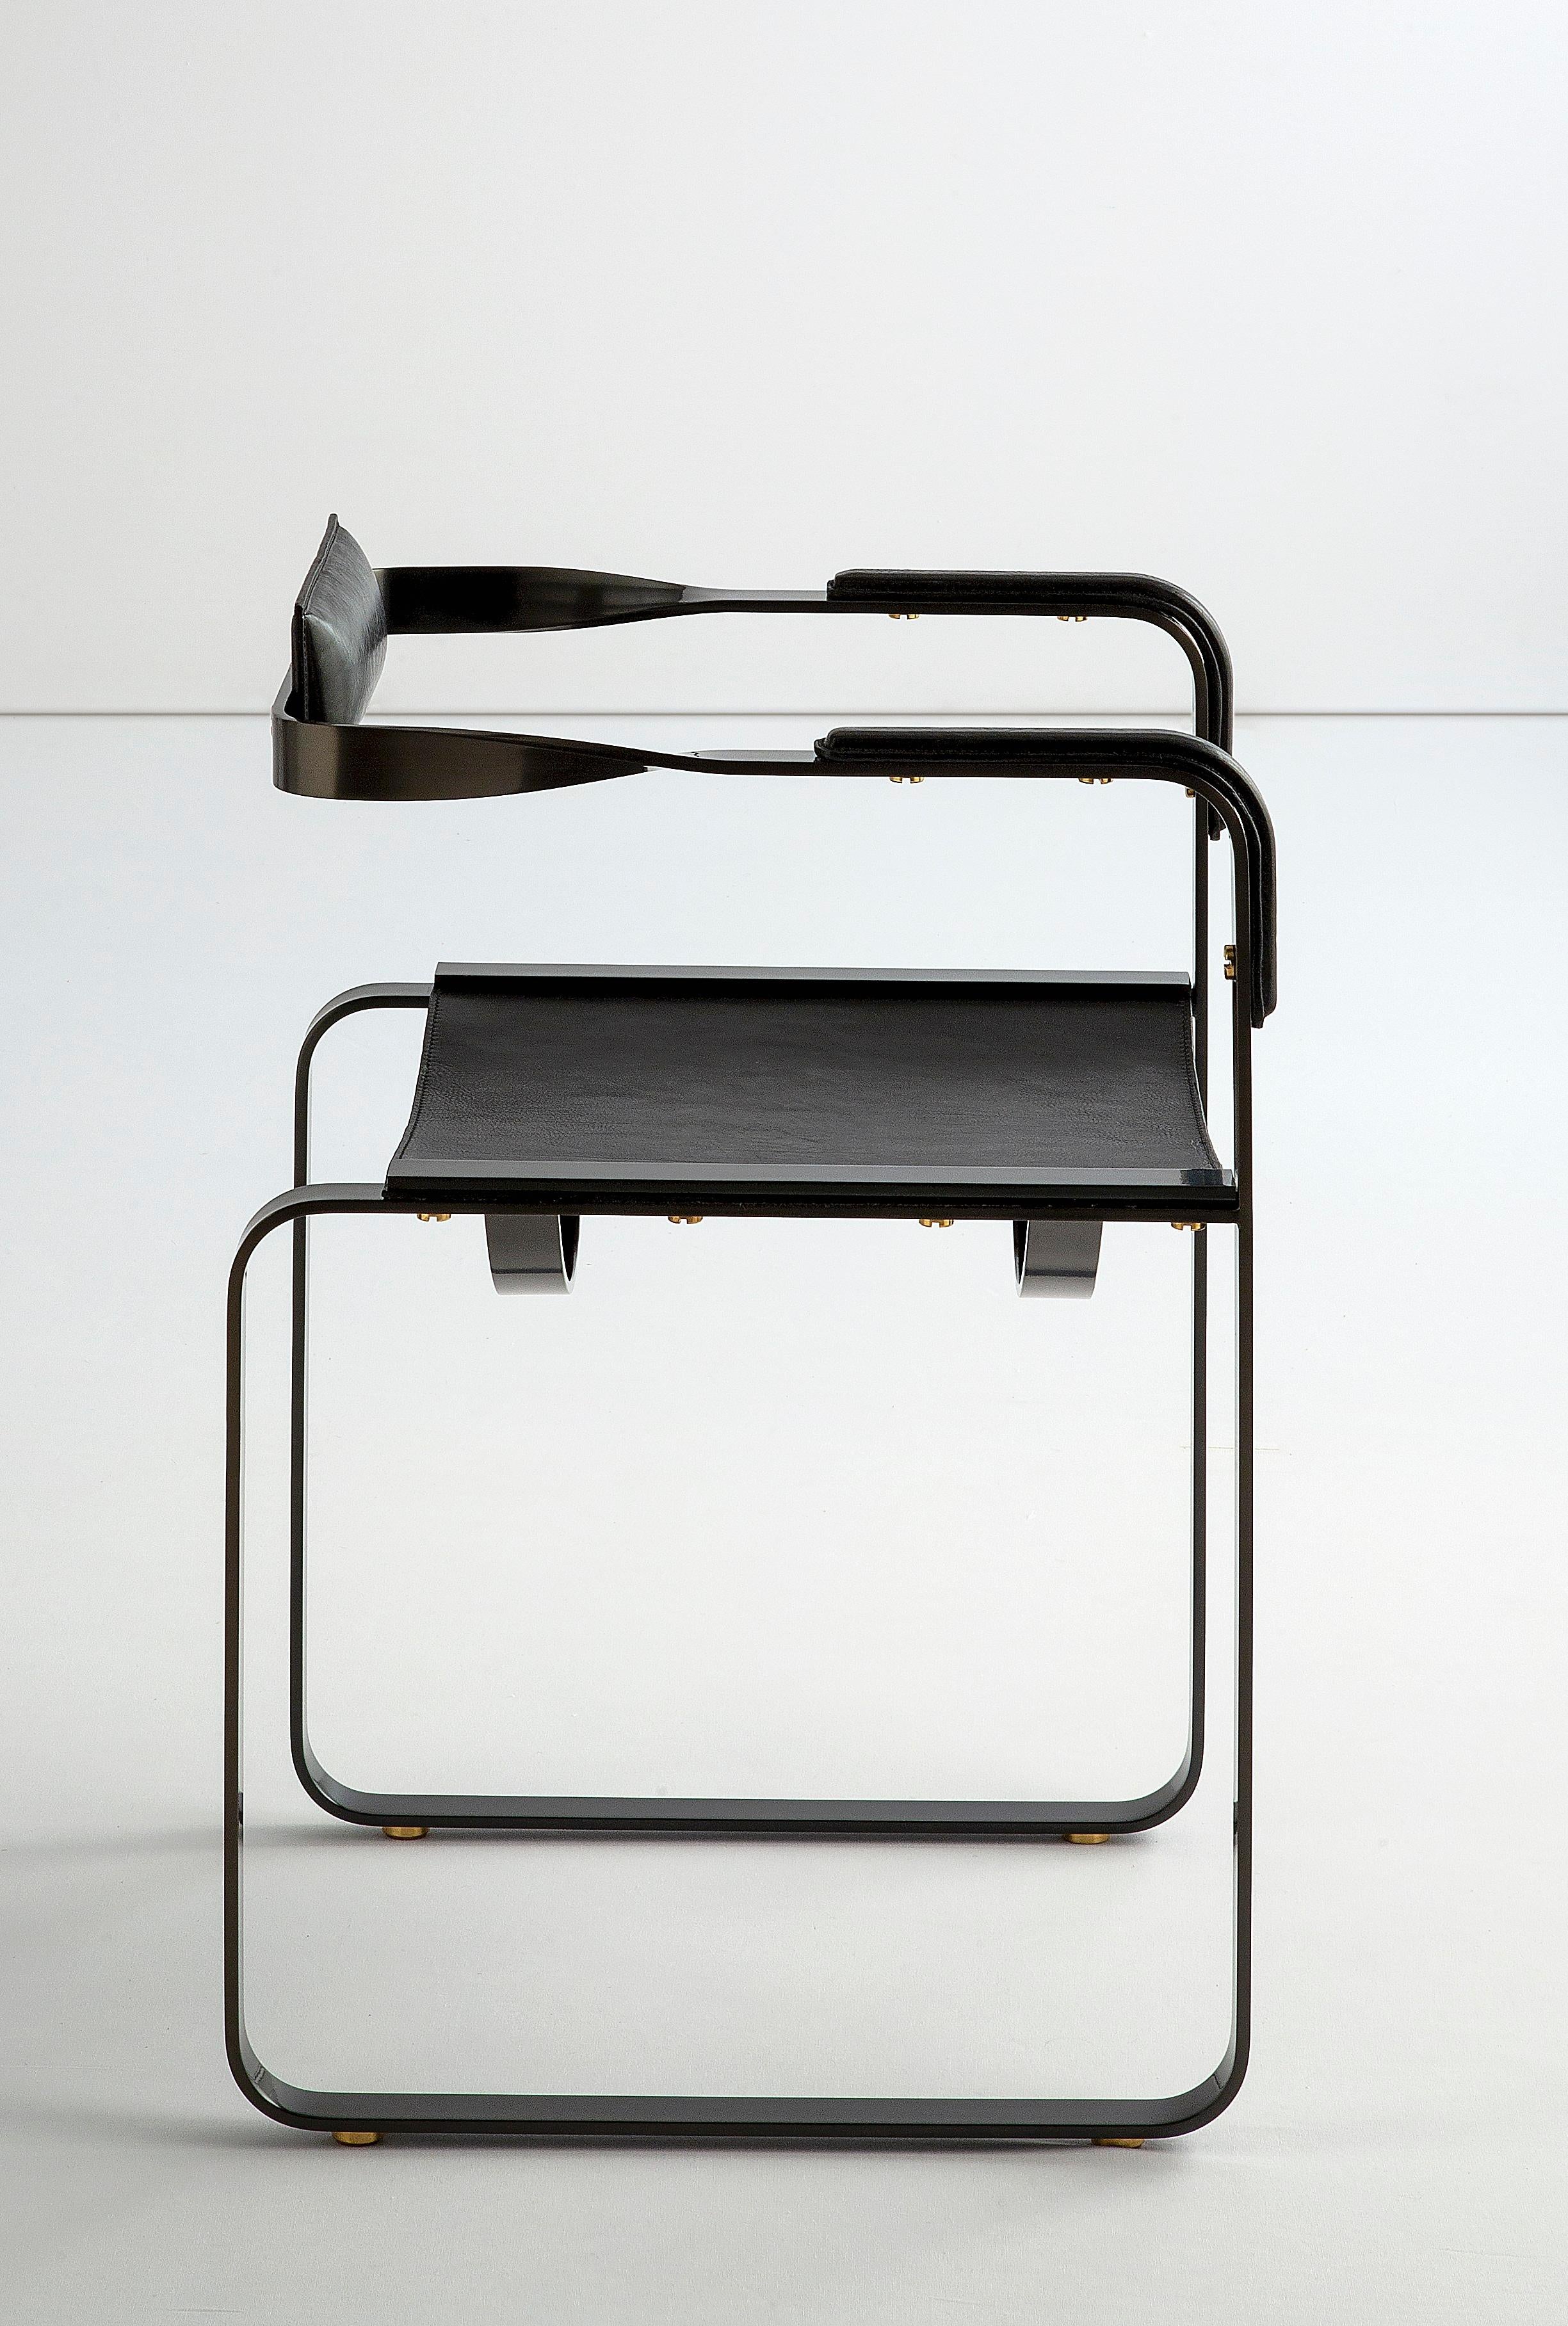 Set of 3 Armchair, Black Smoke Steel and Black Leather, Contemporary Style In New Condition For Sale In Alcoy, Alicante